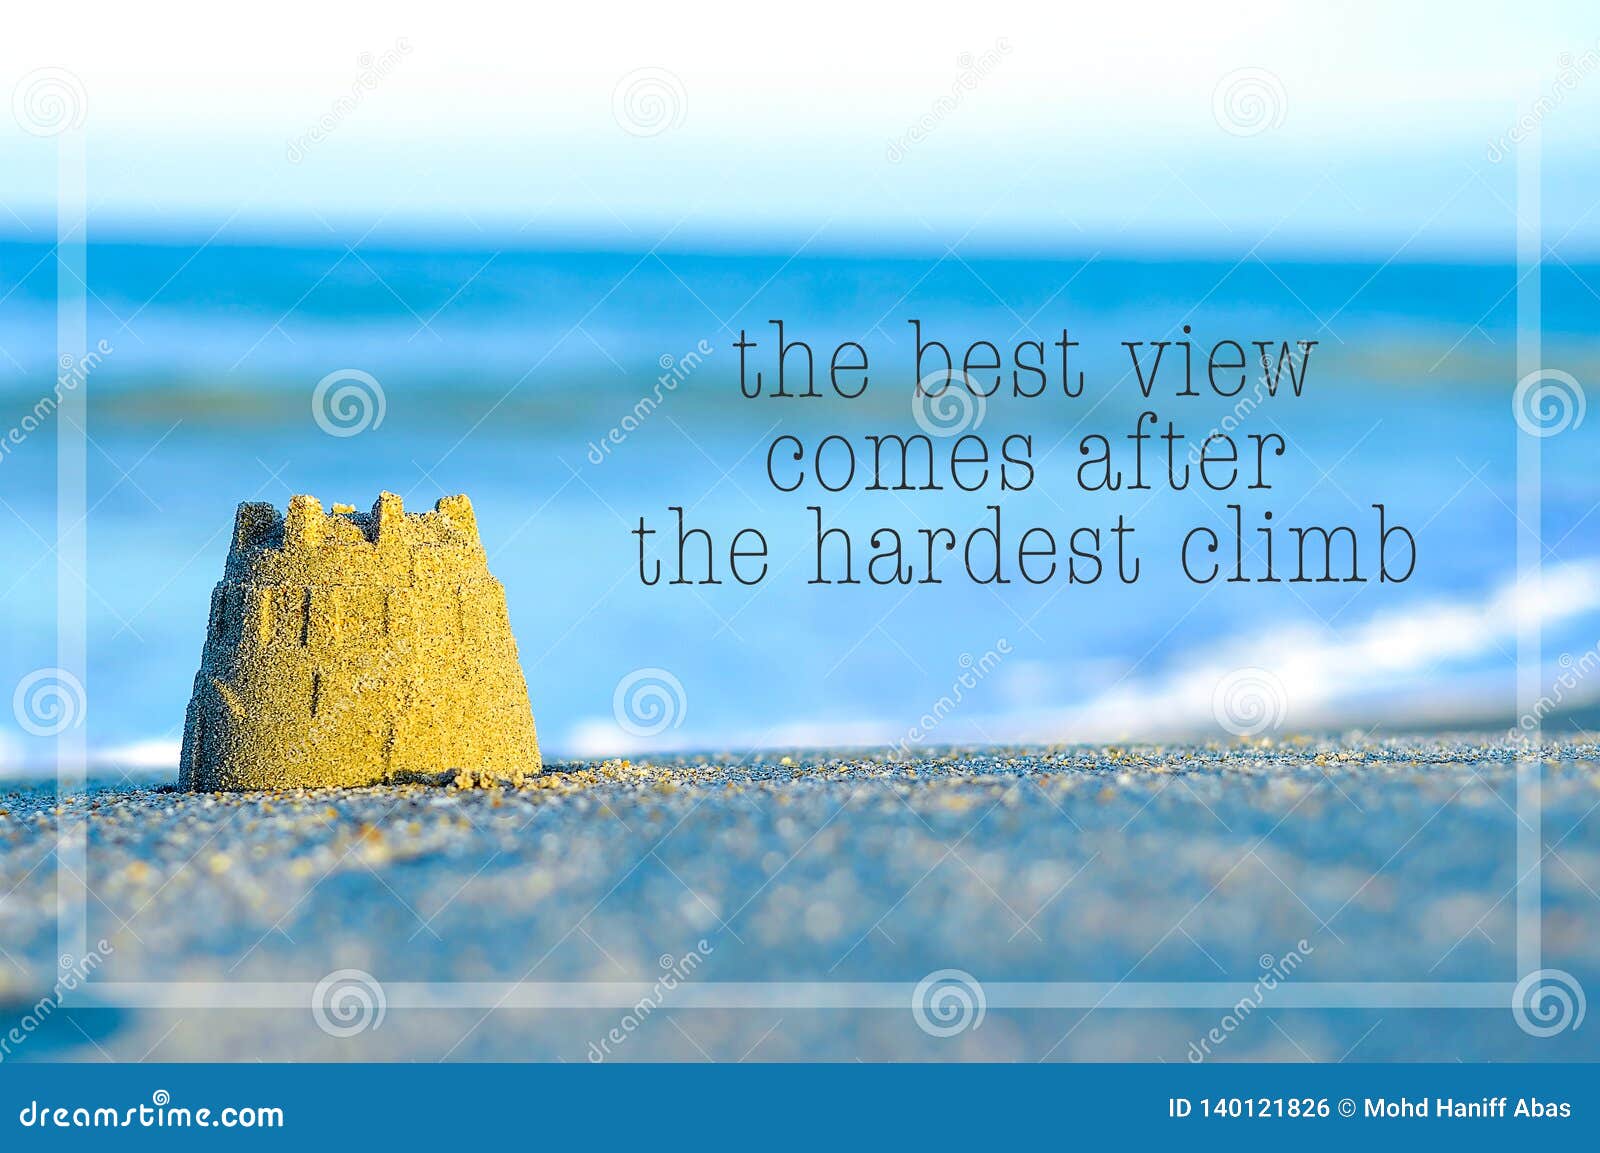 Inspirational Motivating Quote On Blur Beach View With Sand Castle Stock Photo Image Of Design Progress 140121826